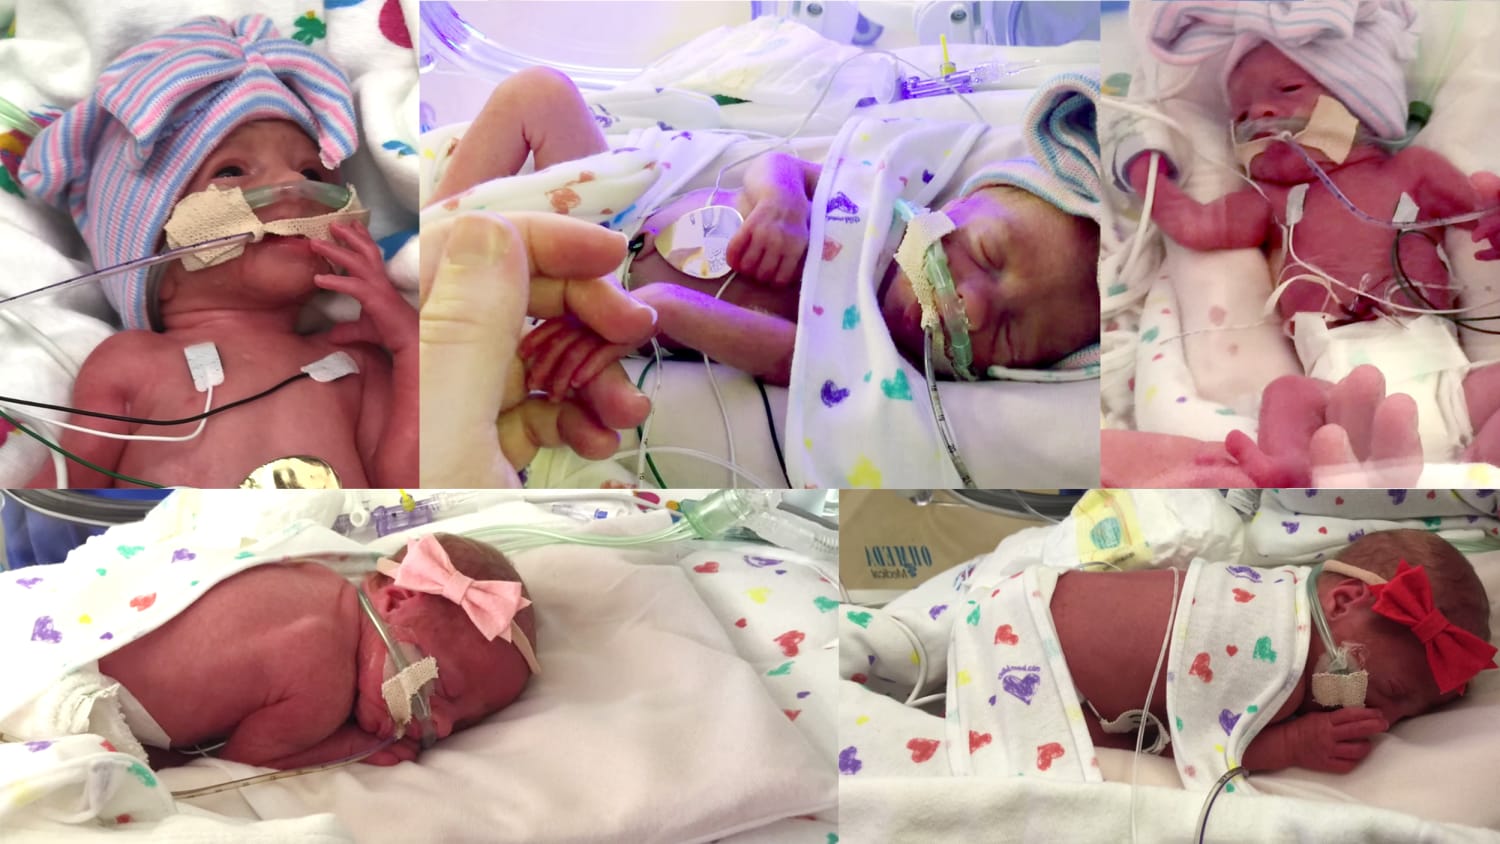 Mom of all-girl quintuplets describes holding babies for first time